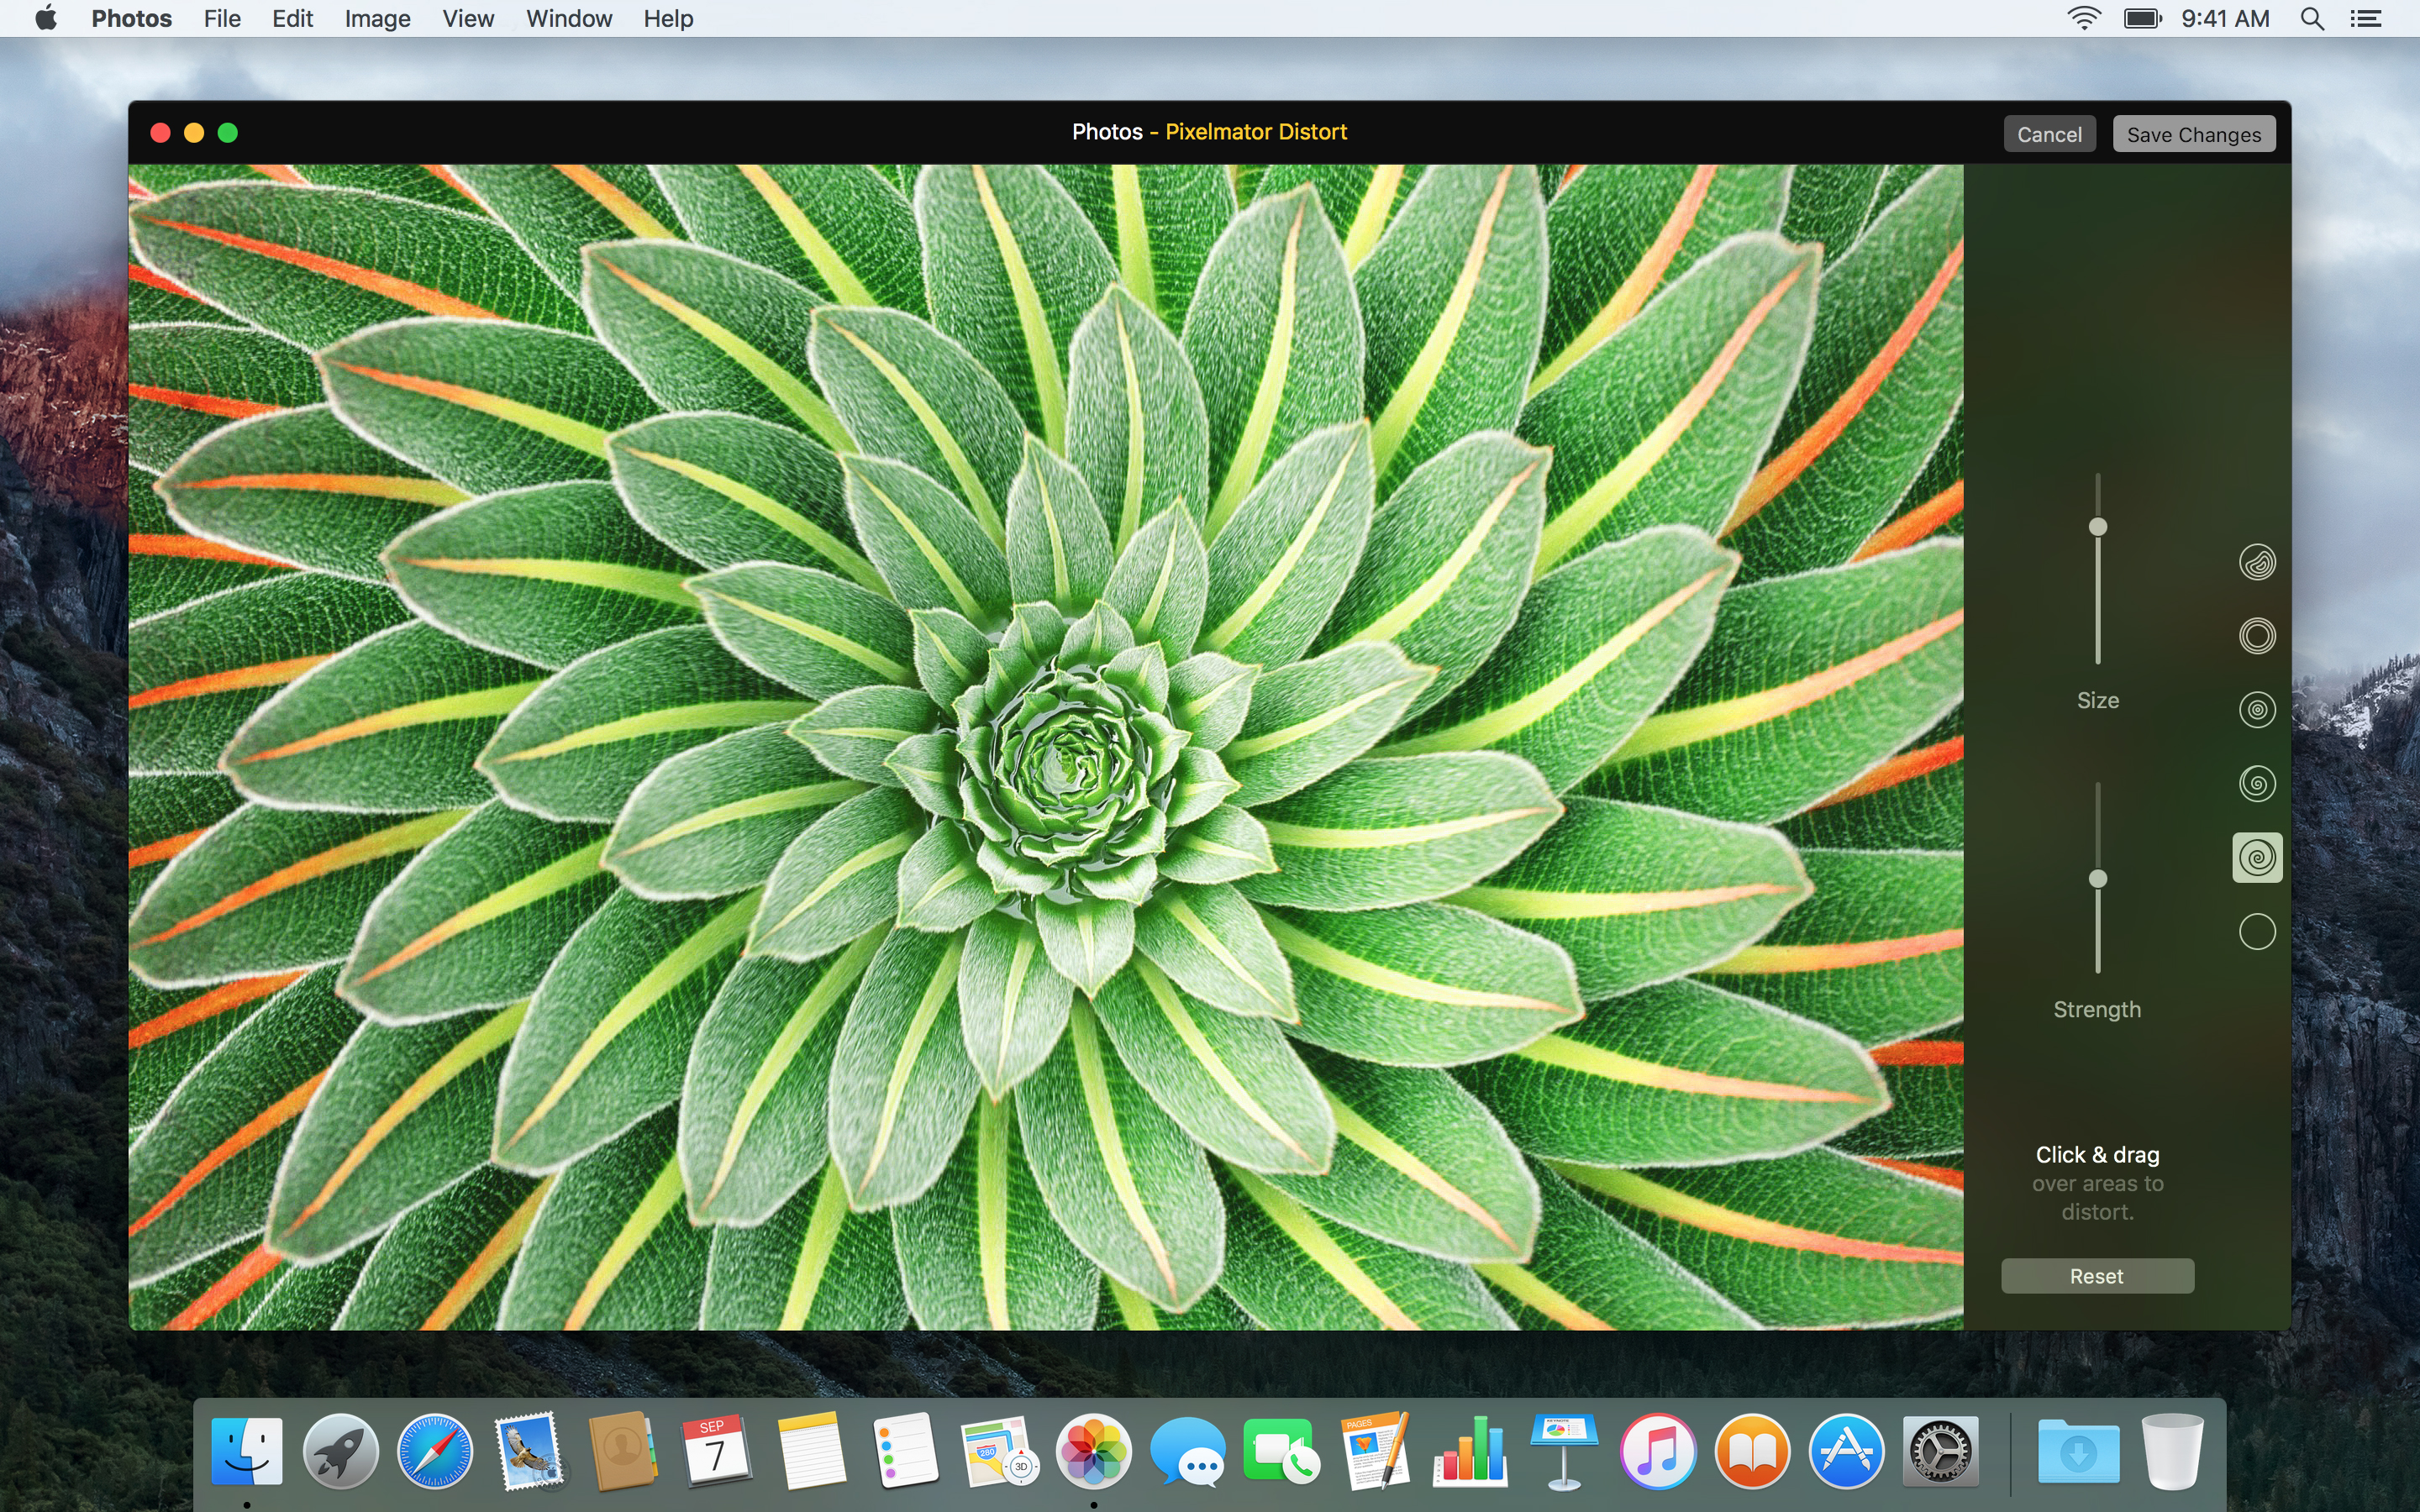 Pixelmator for Mac Updated: Split View Support and Photos Extension